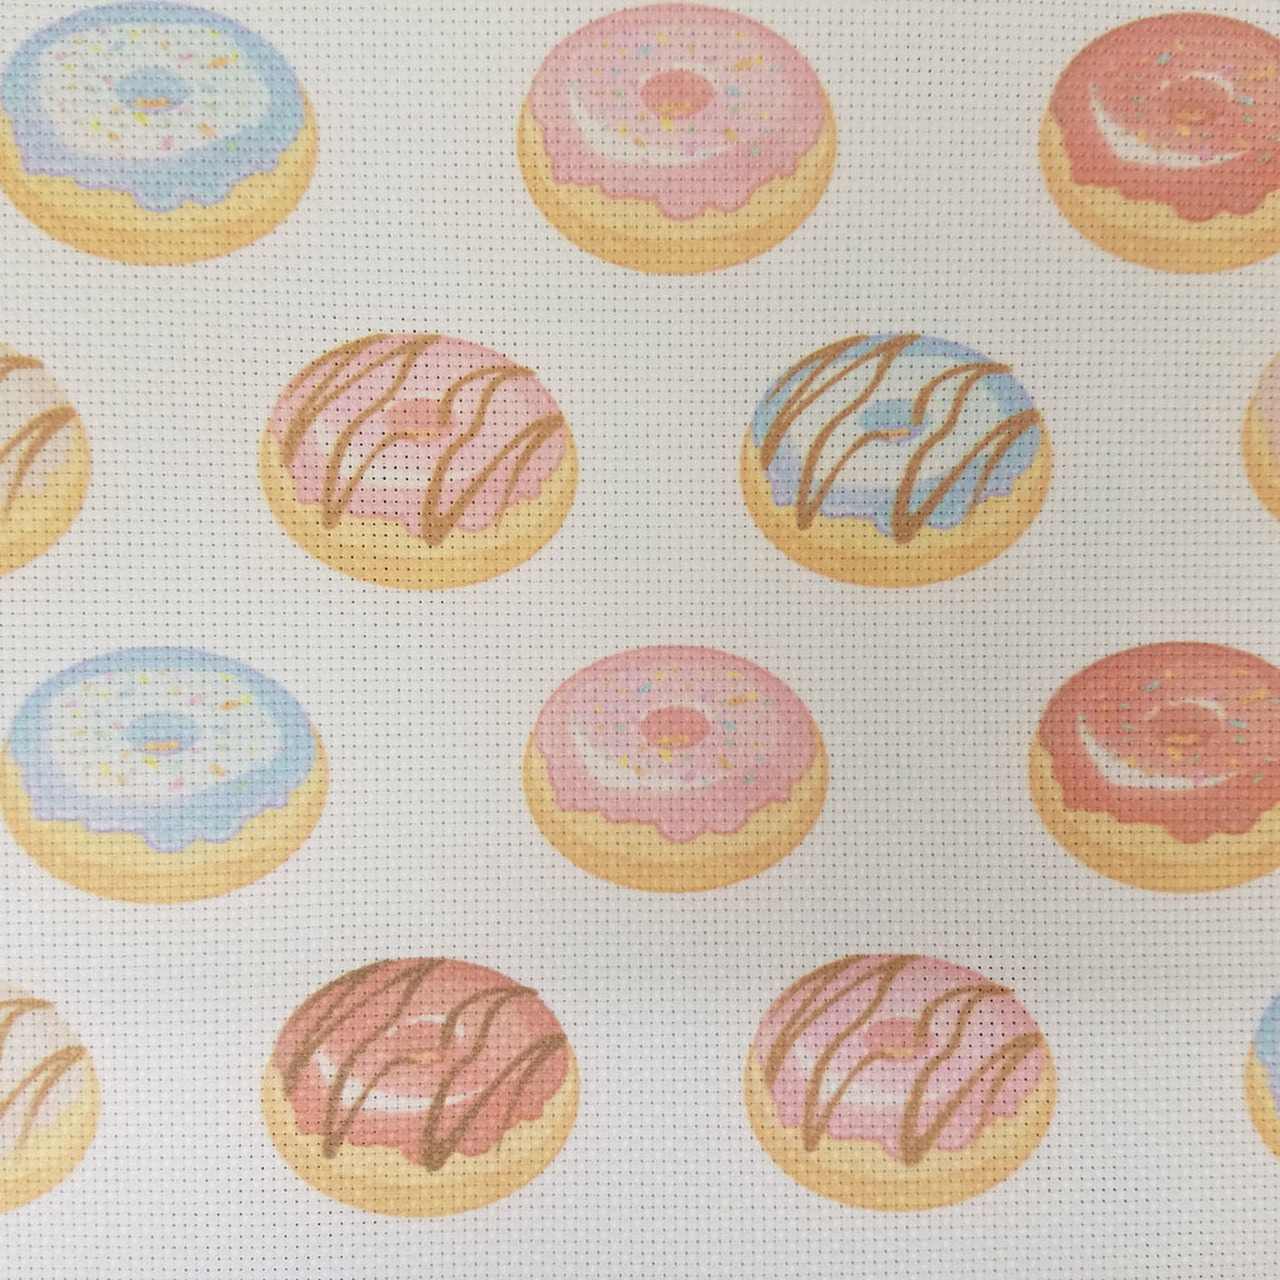 Donut Time Patterned Cross Stitch Fabric